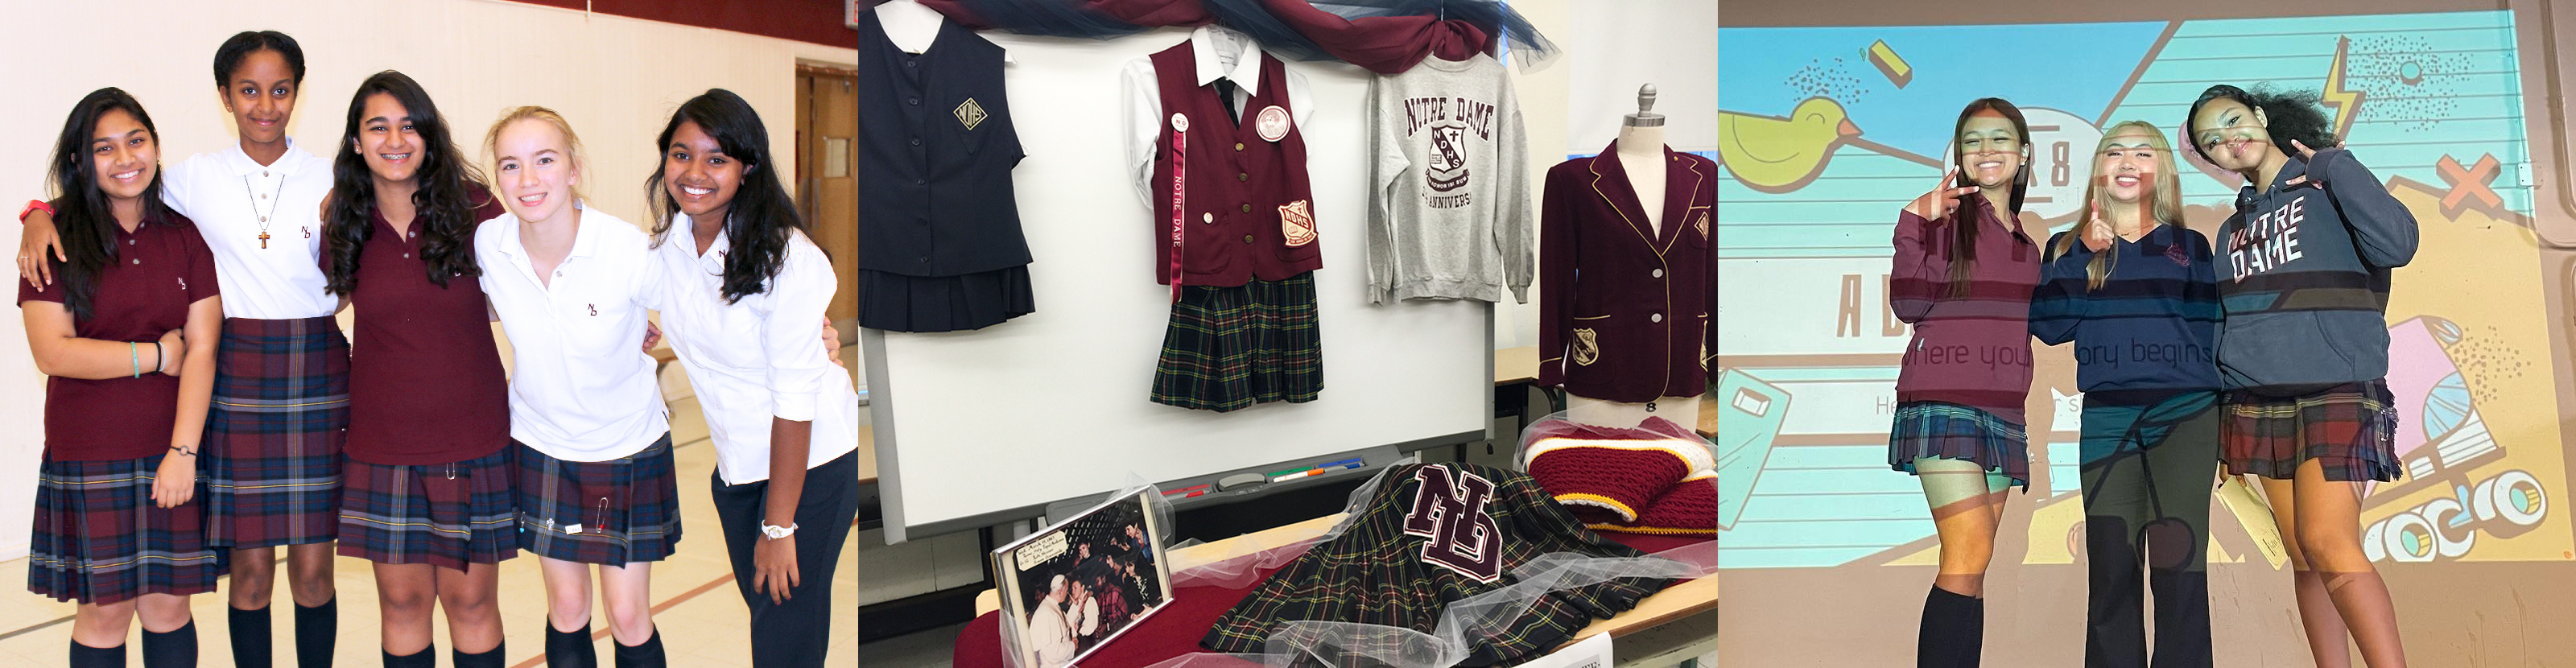 First picture is a group photo of five Notre Dame students posing together in school uniform. Second photo is a display of Notre Dame school uniforms. Third photo shows three Notre Dame students posing at an art installation in school uniform.